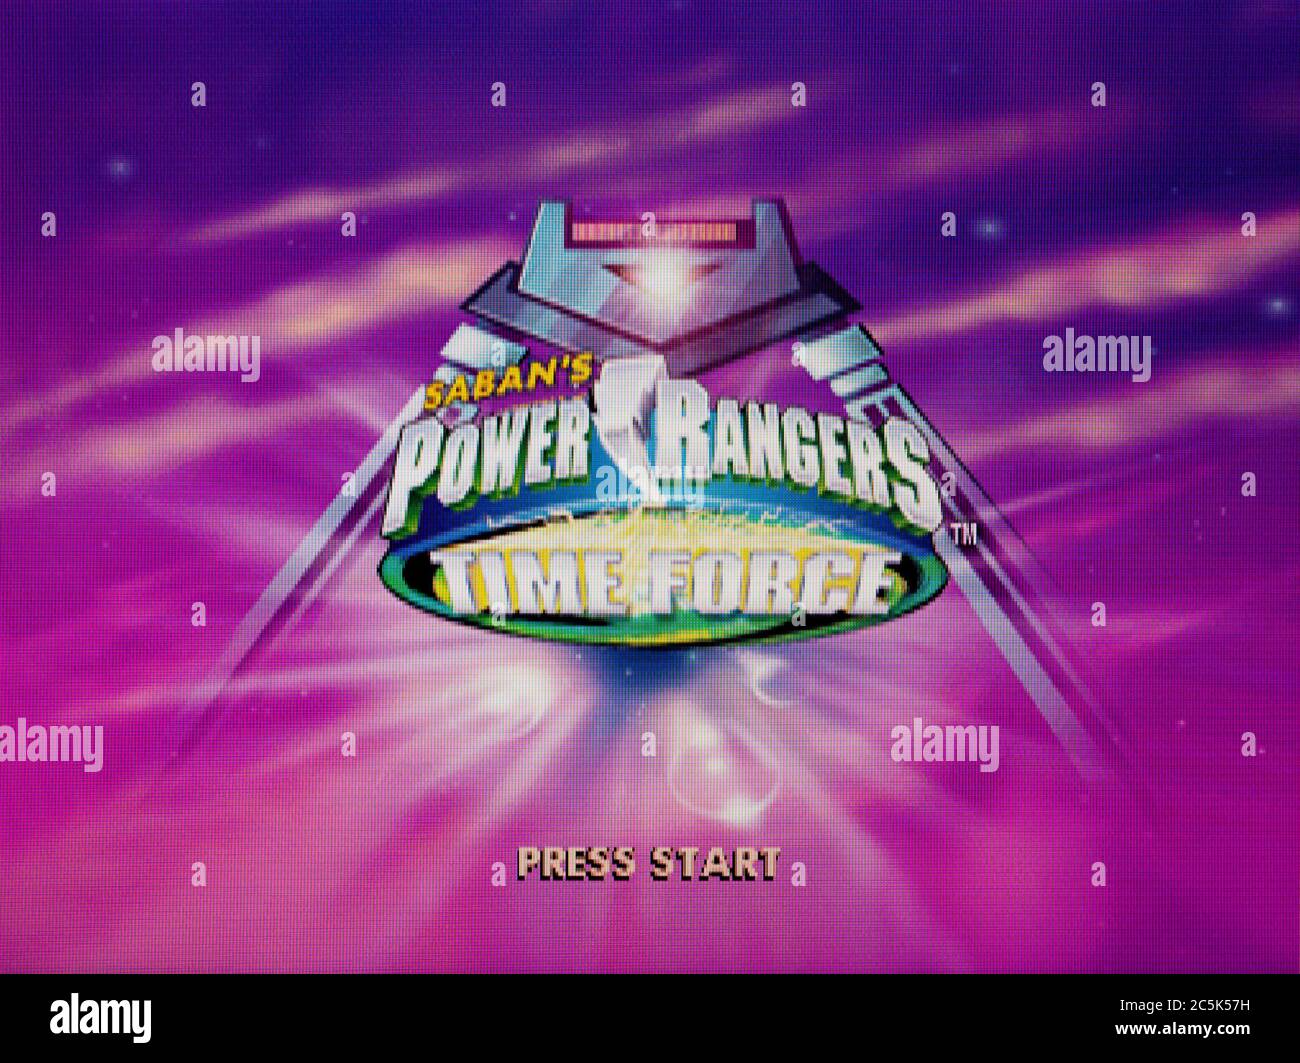 Power Rangers Time Force - Sony PlayStation 1 PS1 PSX - solo para uso editorial Foto de stock